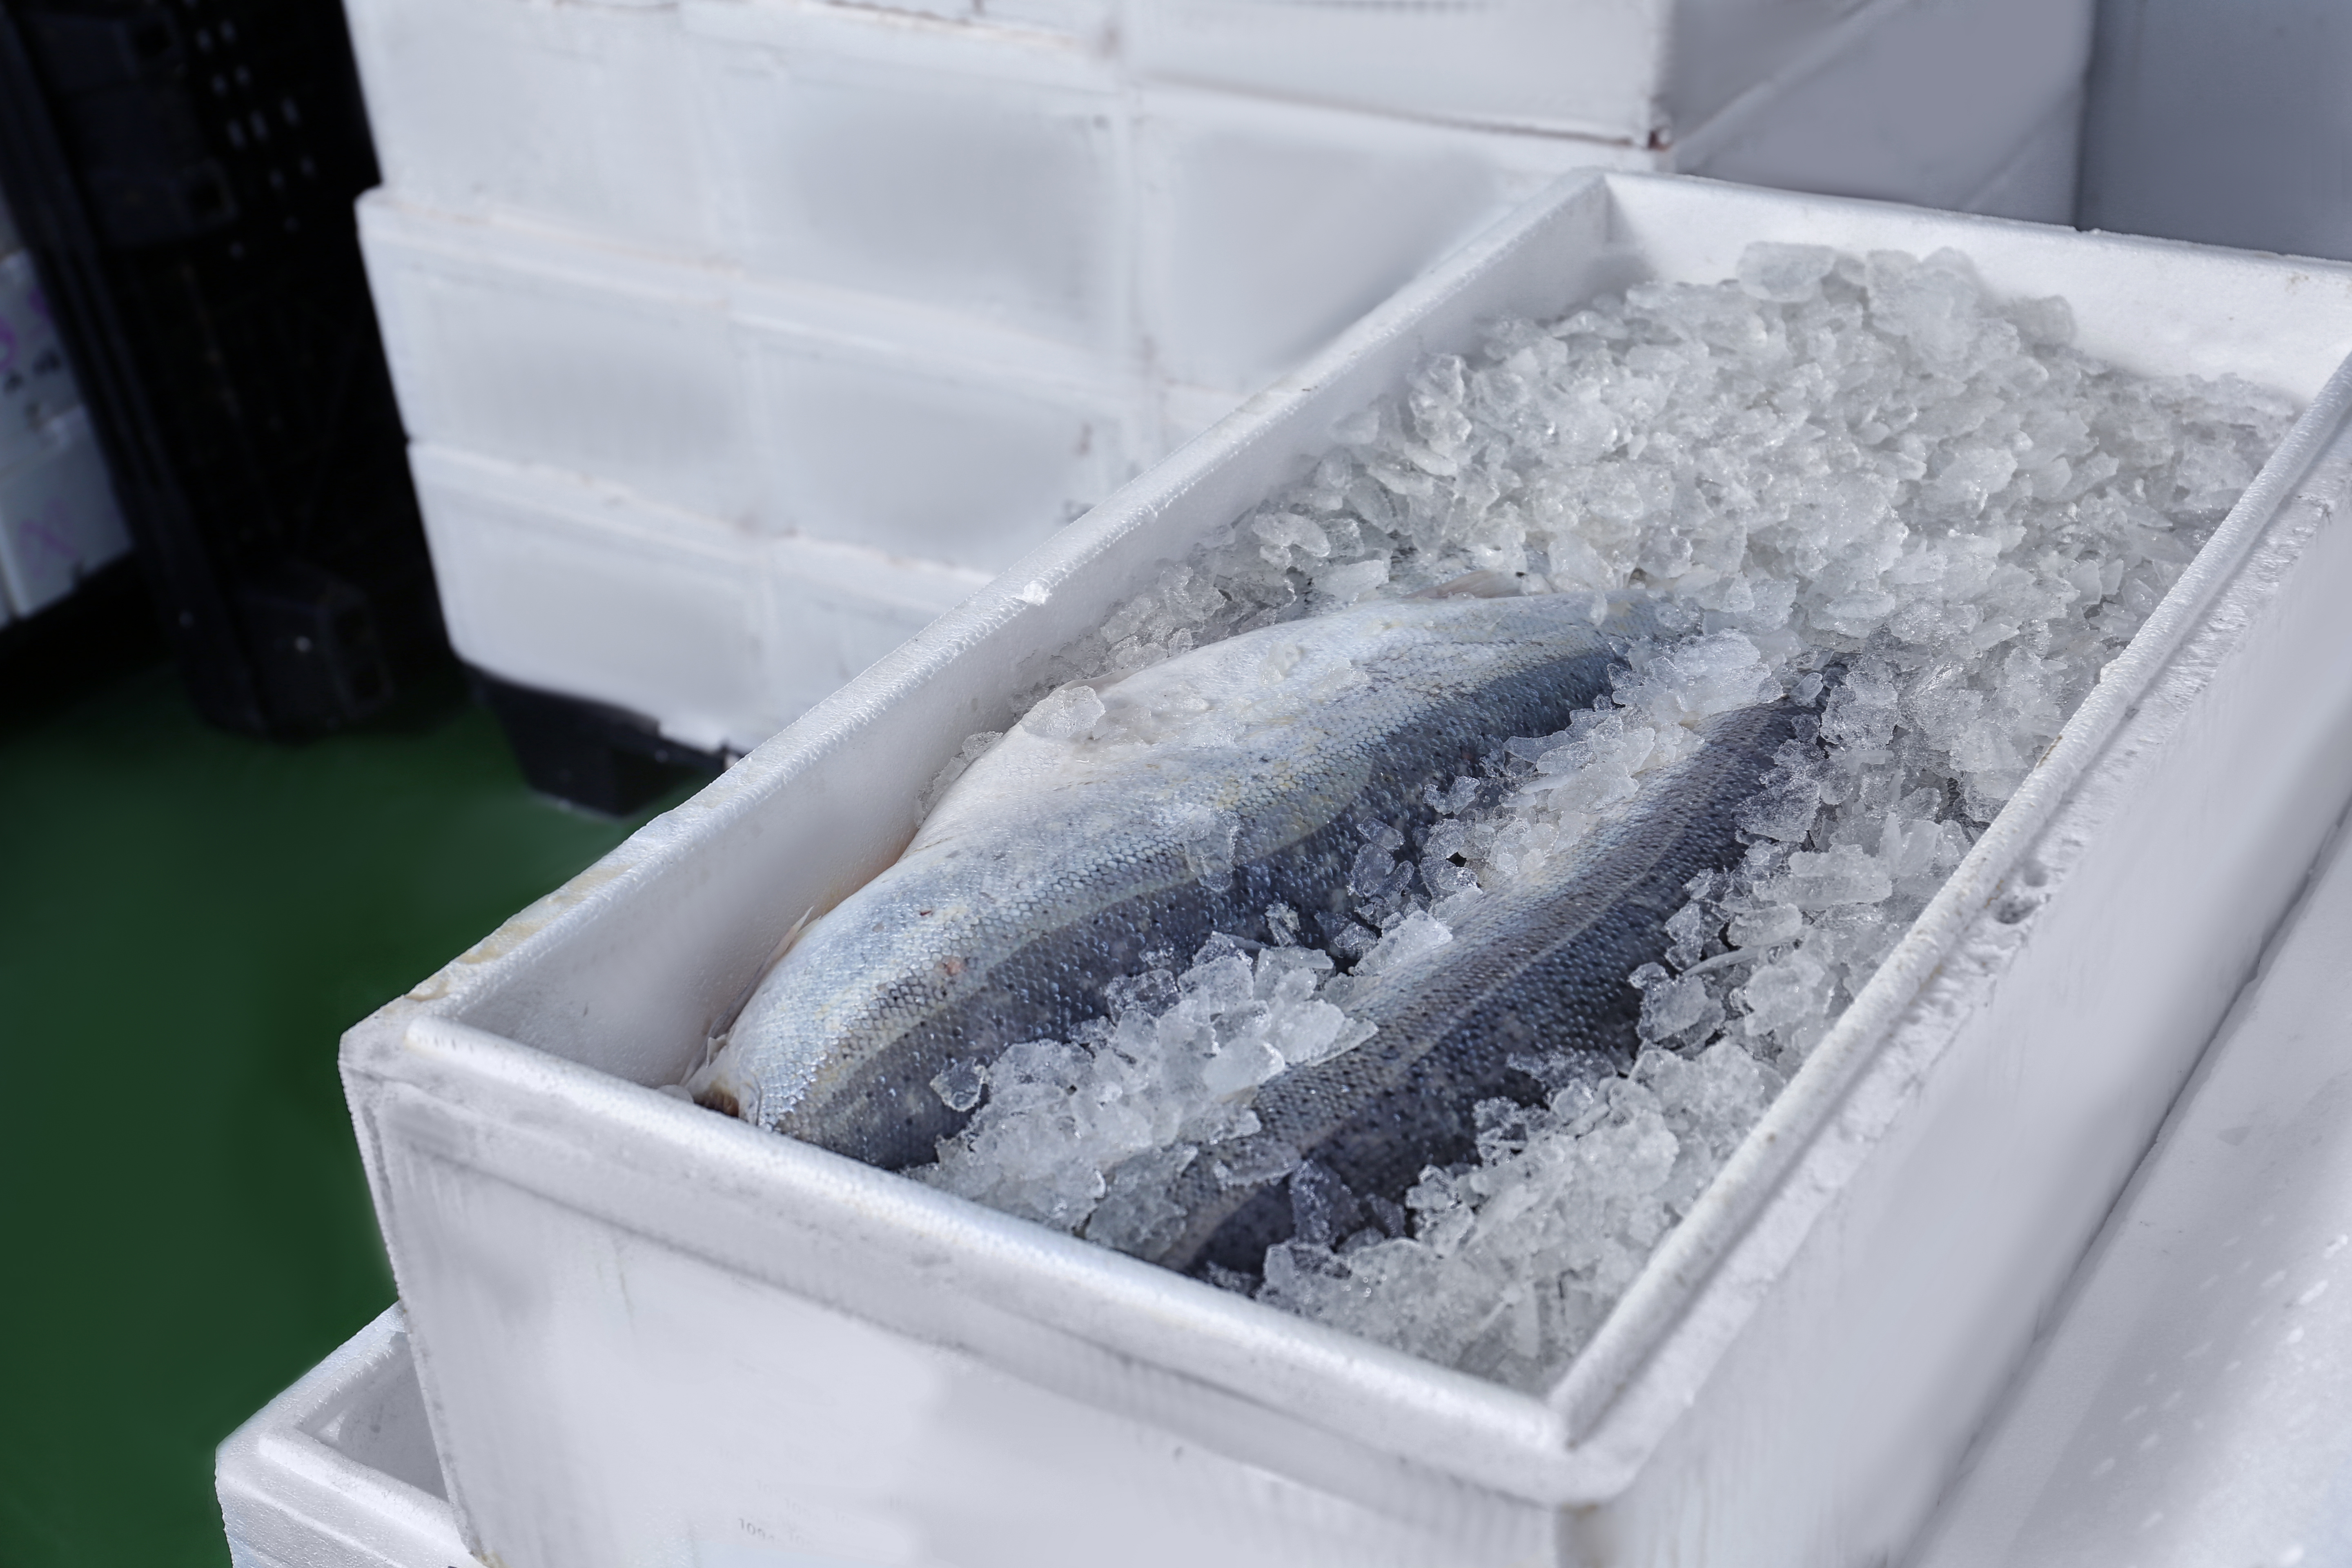 Box with fresh salmon in refrigerated room